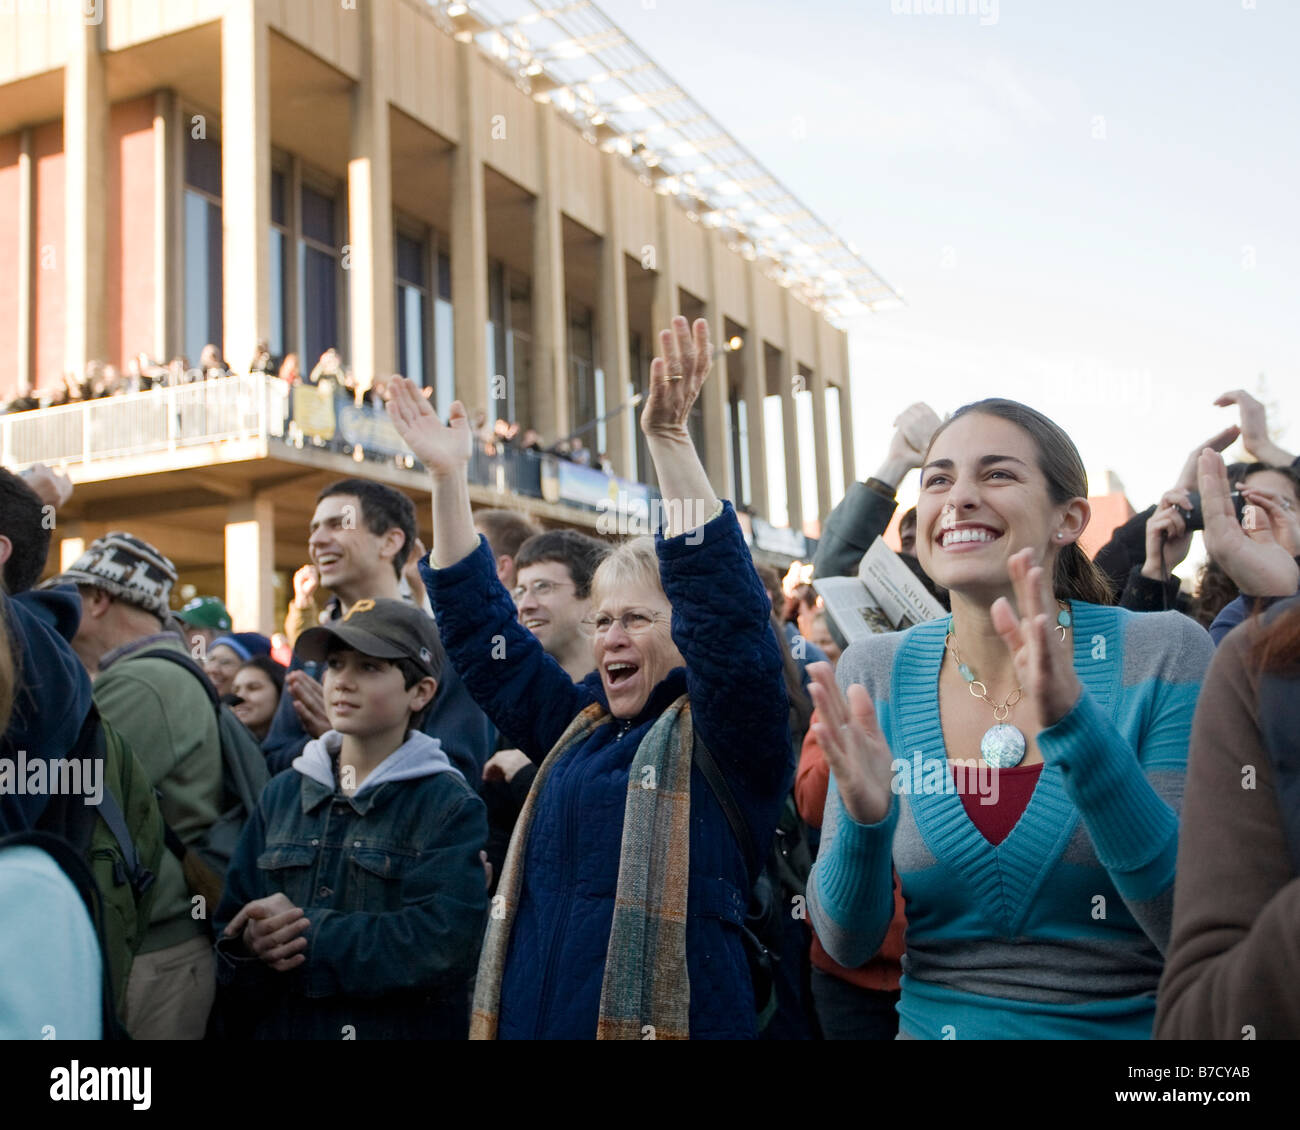 An emotional crowd celebrates the inauguration of Barack Obama at the University of California at Berkeley campus. Stock Photo